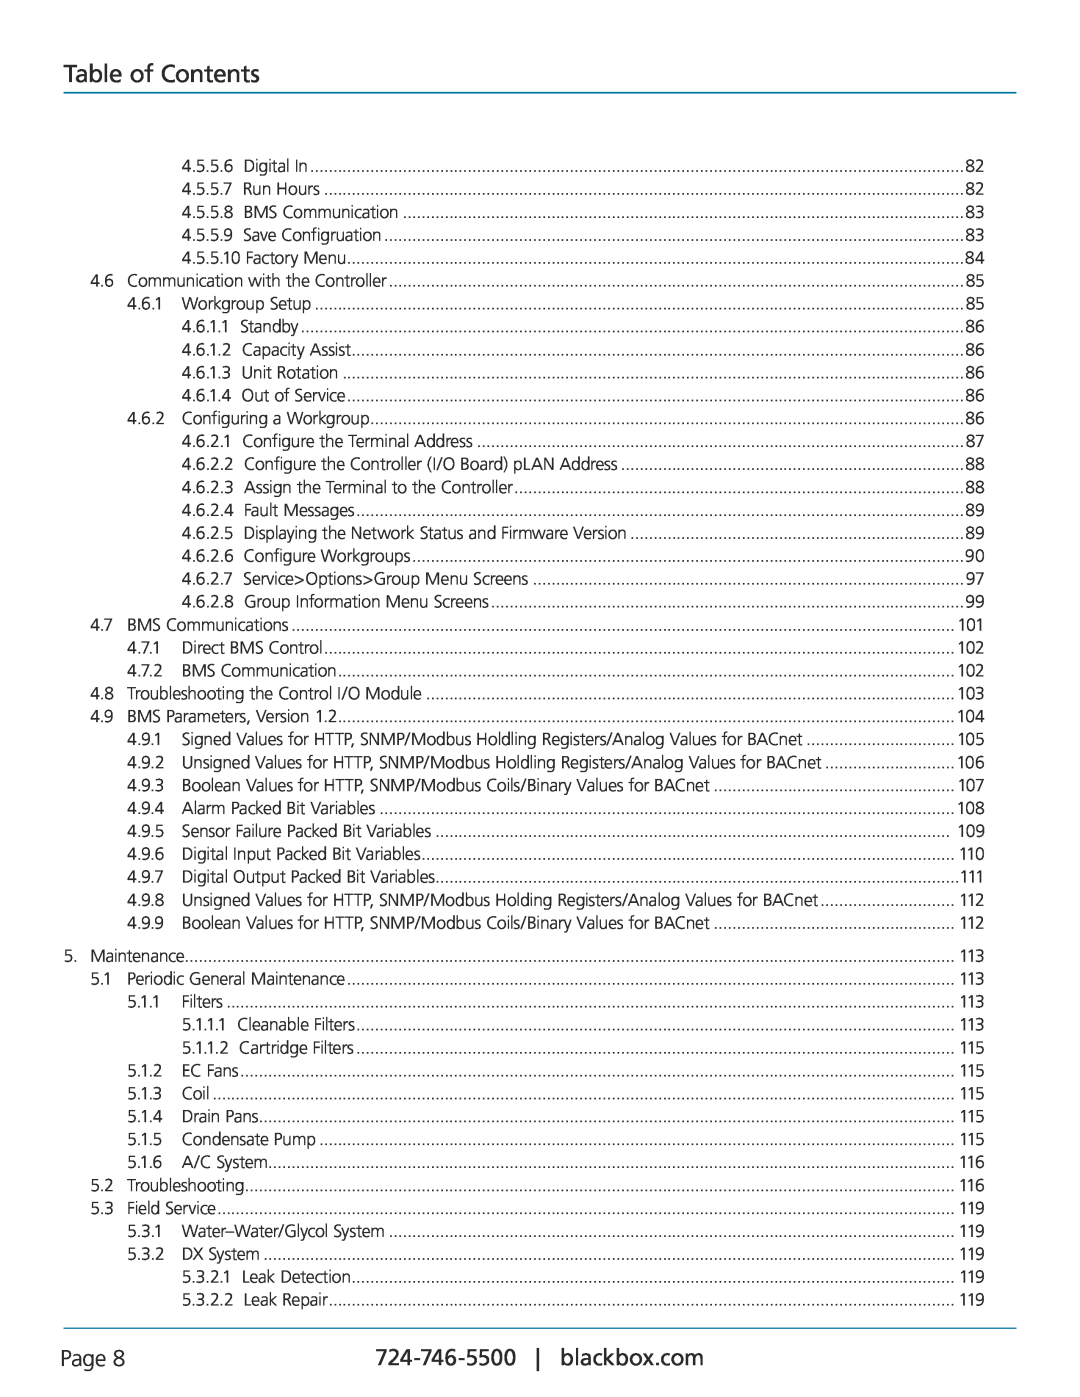 Black Box CRDX-A-FS-24KW, CRDX-W-FS-12KW, CRDX-G-FS-24KW, CRDX-W-FS-24KW, CRDX-G-FS-12KW user manual Table of Contents, Page 